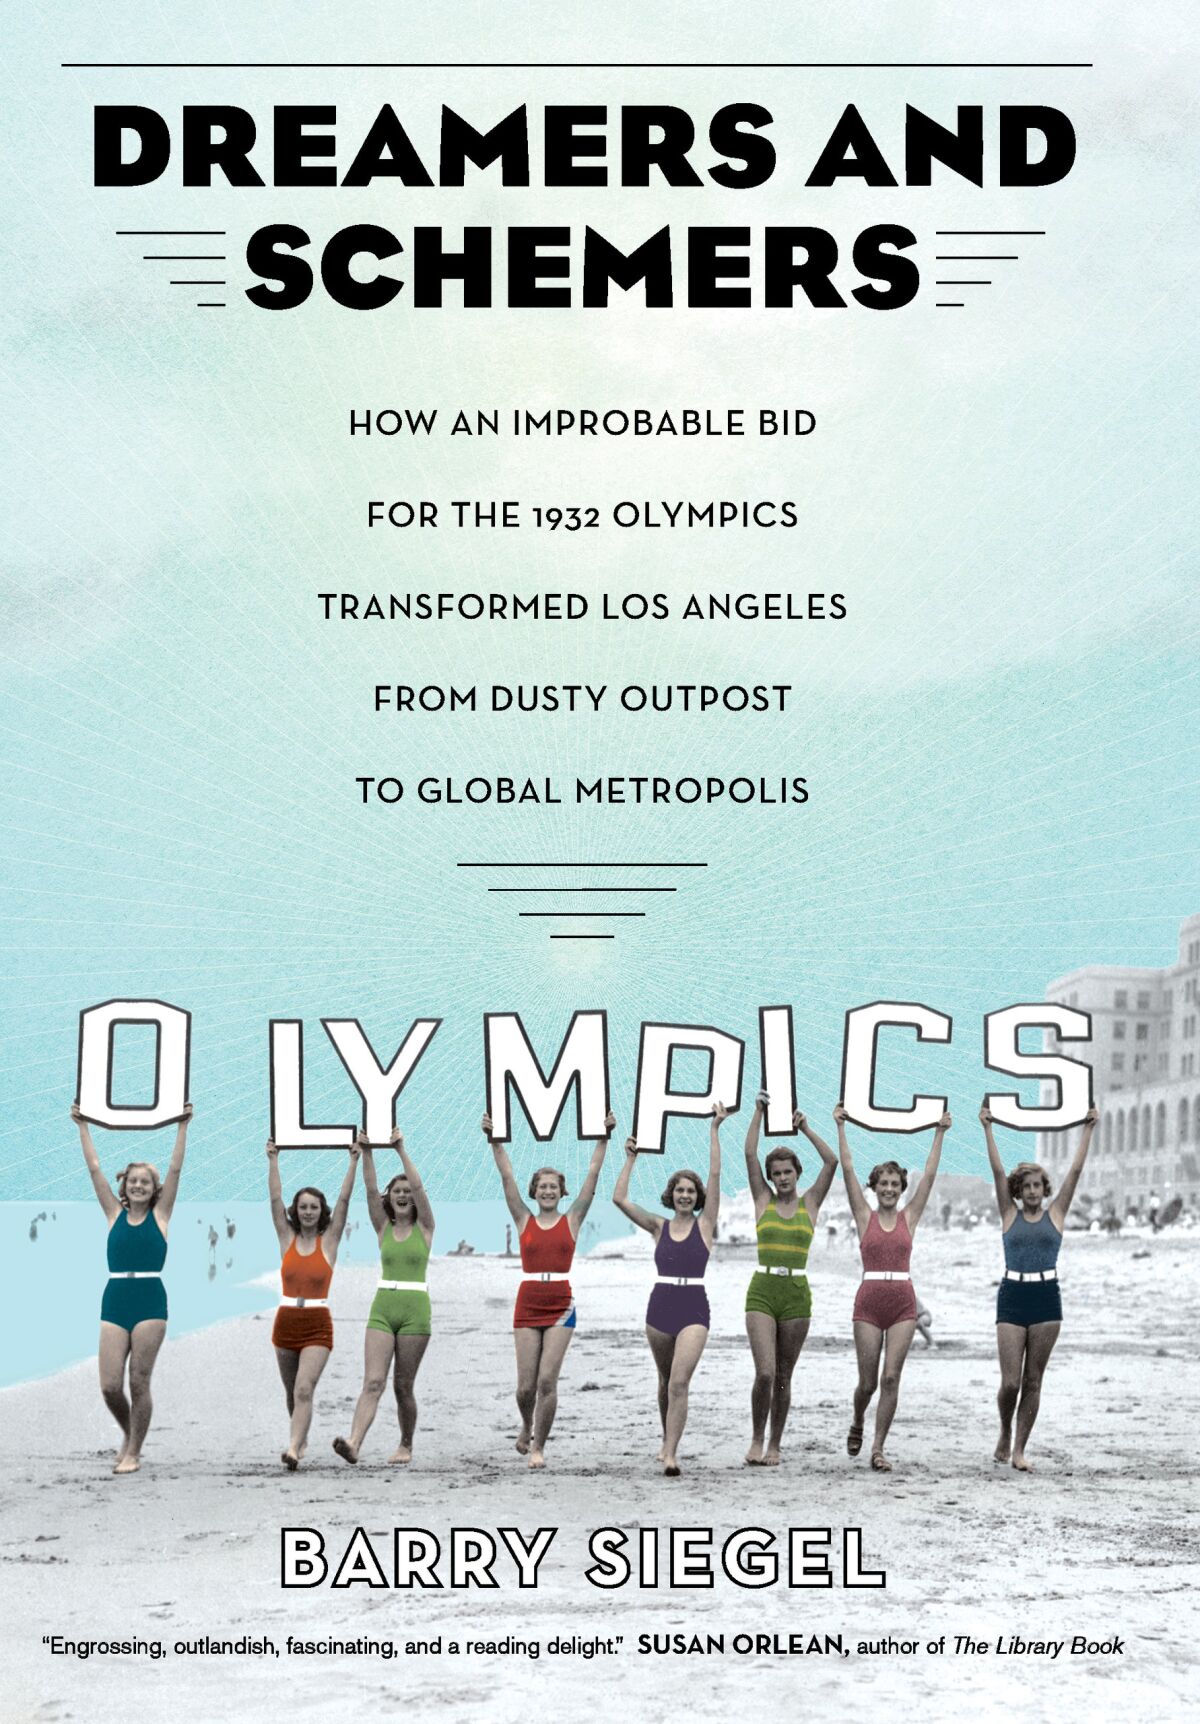 Barry Siegel’s new book, “Dreamers and Schemers.”